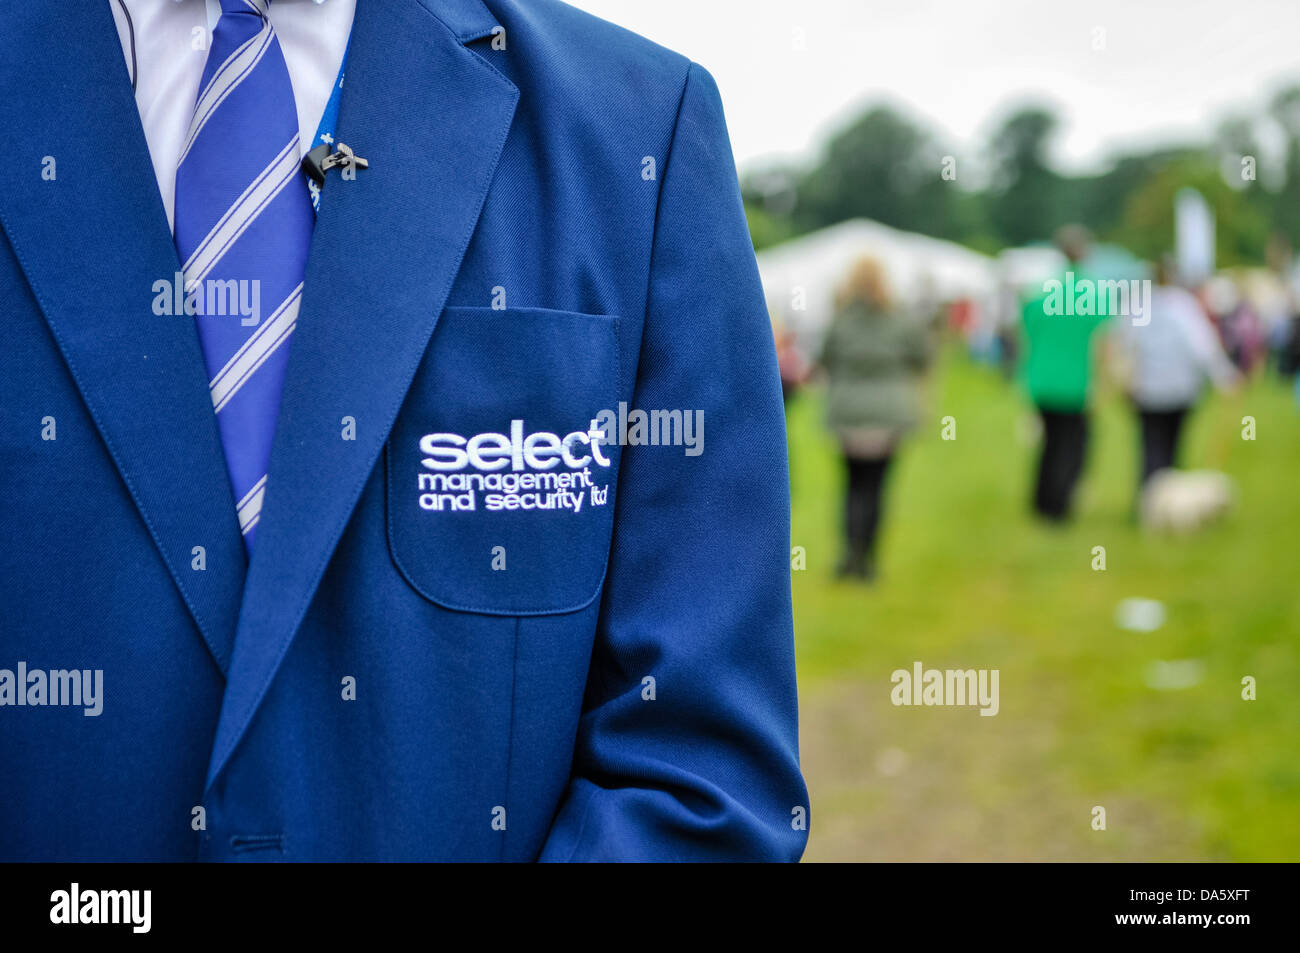 Security guard wears a formal uniform for Select Security, a provider of security and event staff in Northern Ireland. Stock Photo